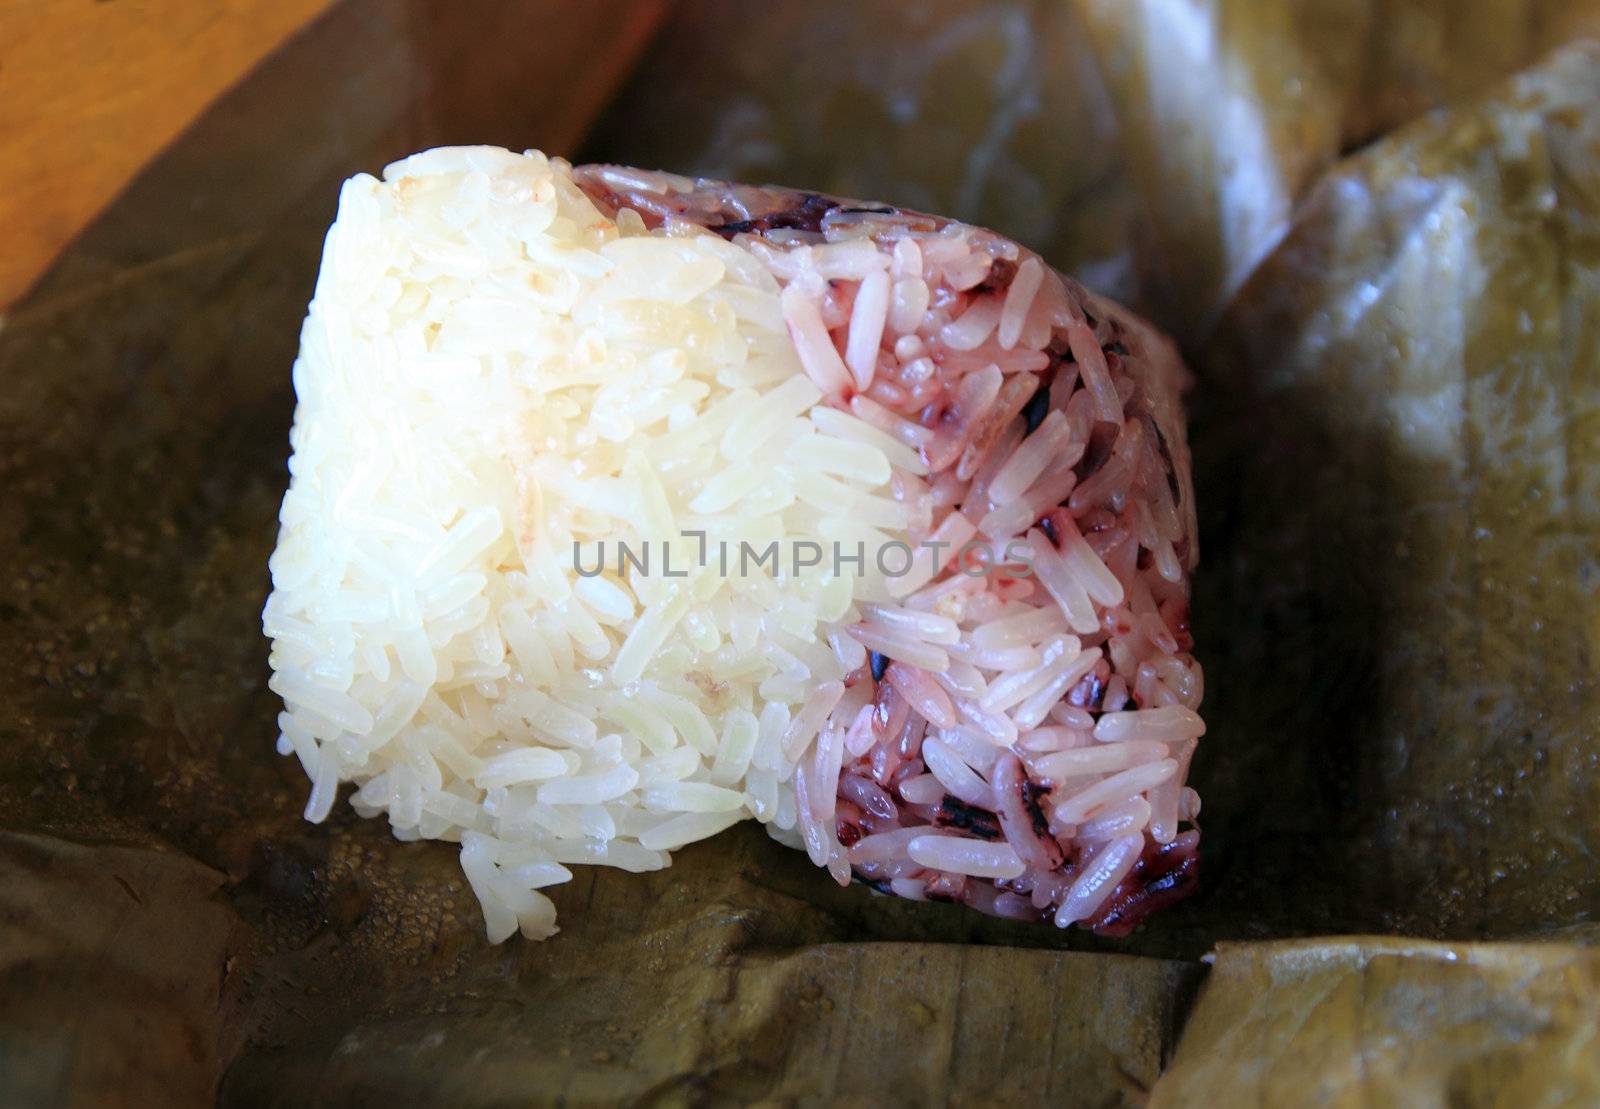 glutinous rice wrapped in banana leaves by geargodz